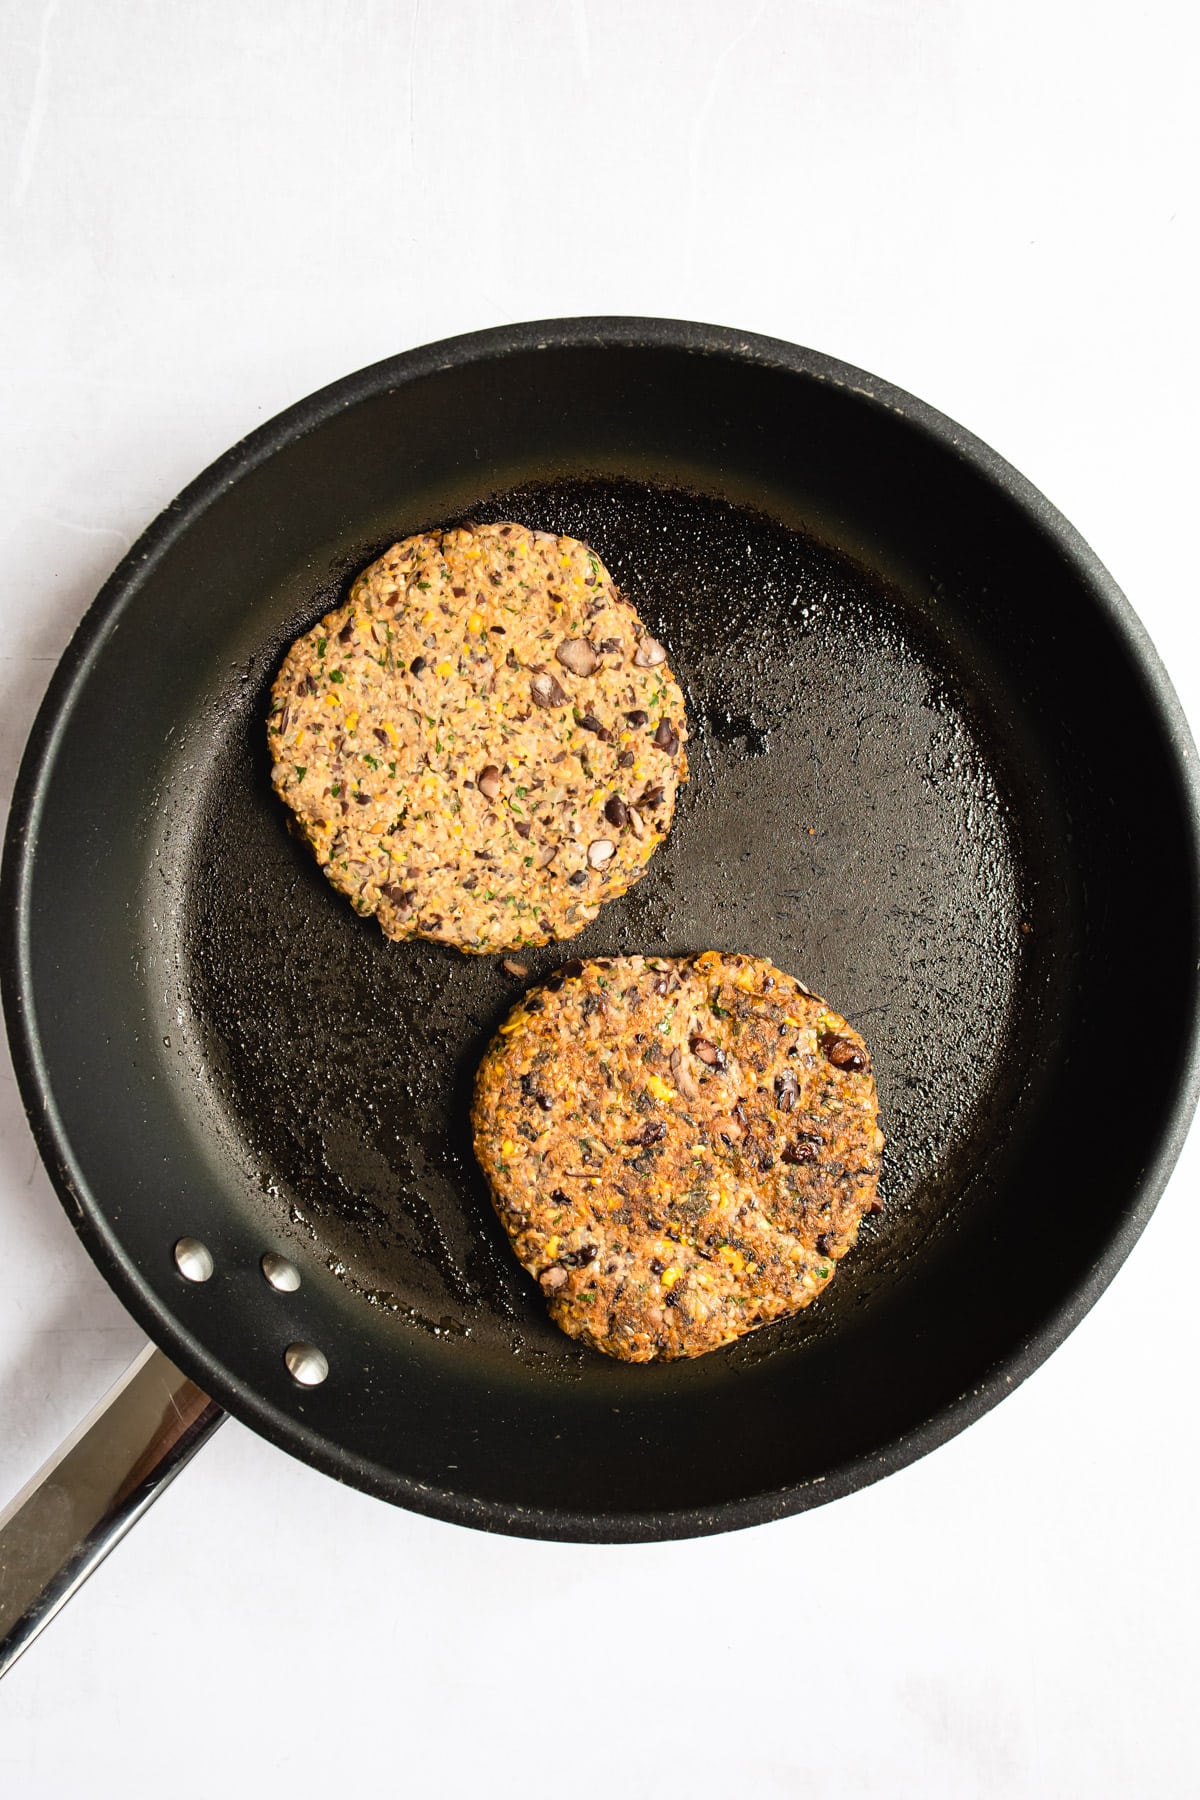 Two black bean burgers frying in a pan.